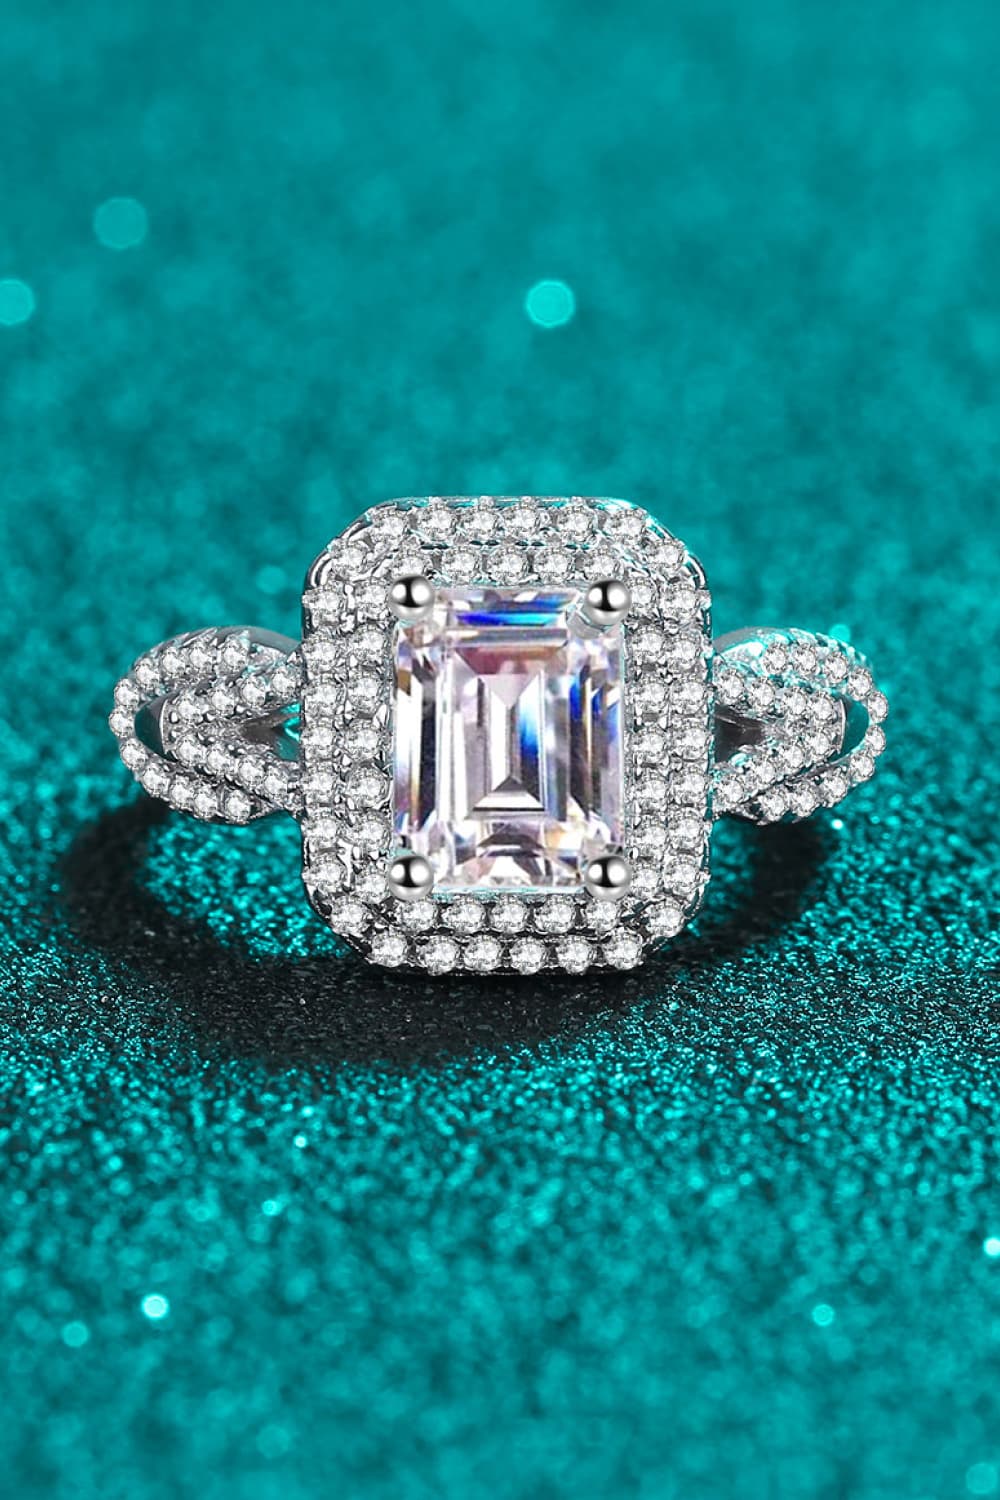 Can't Stop Your Shine 2 Carat Moissanite Ring - Dash Trend